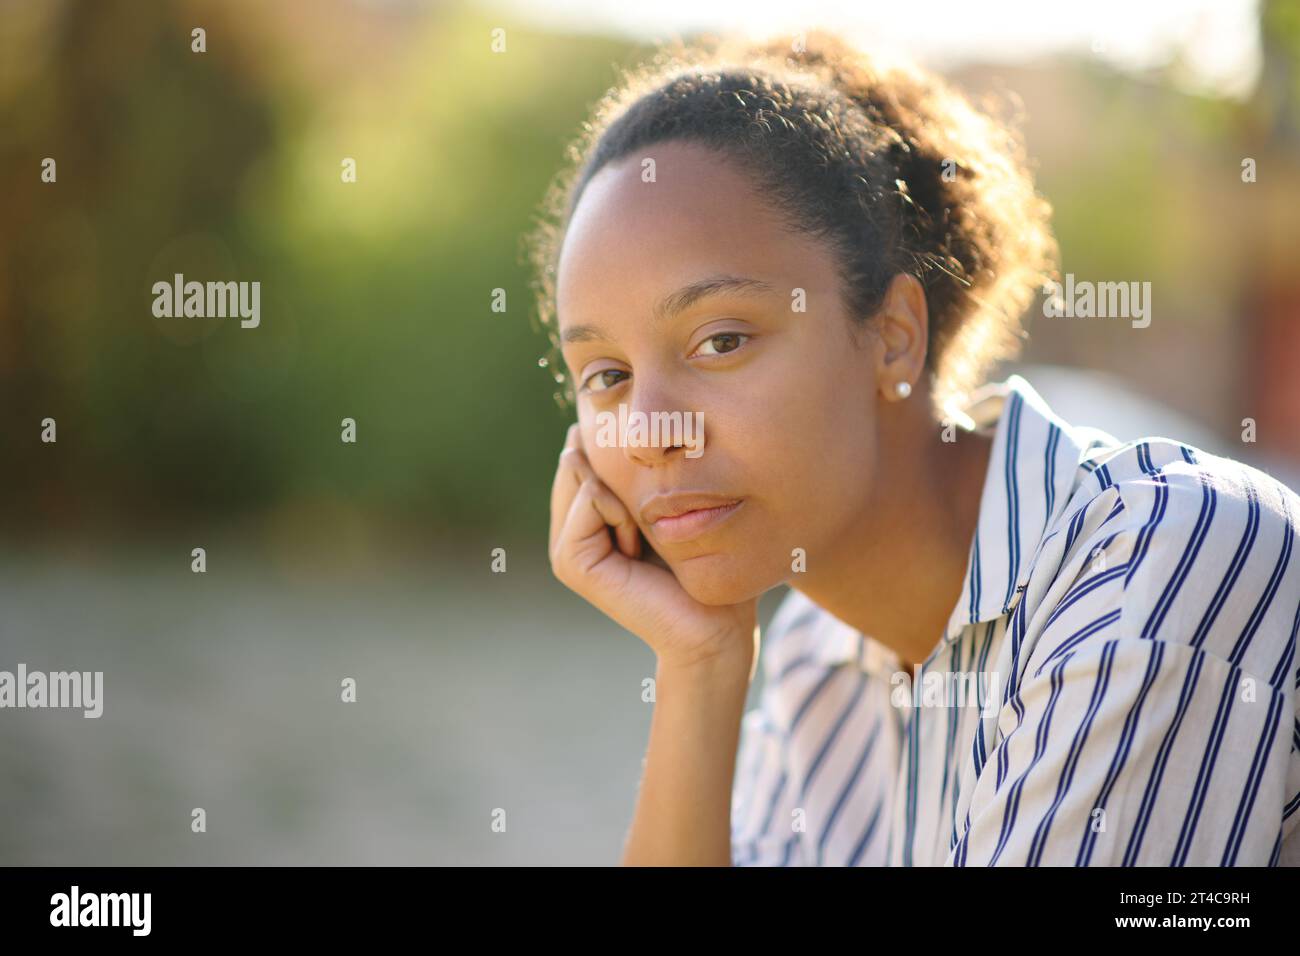 Portrait of a serious black woman posing in a park Stock Photo